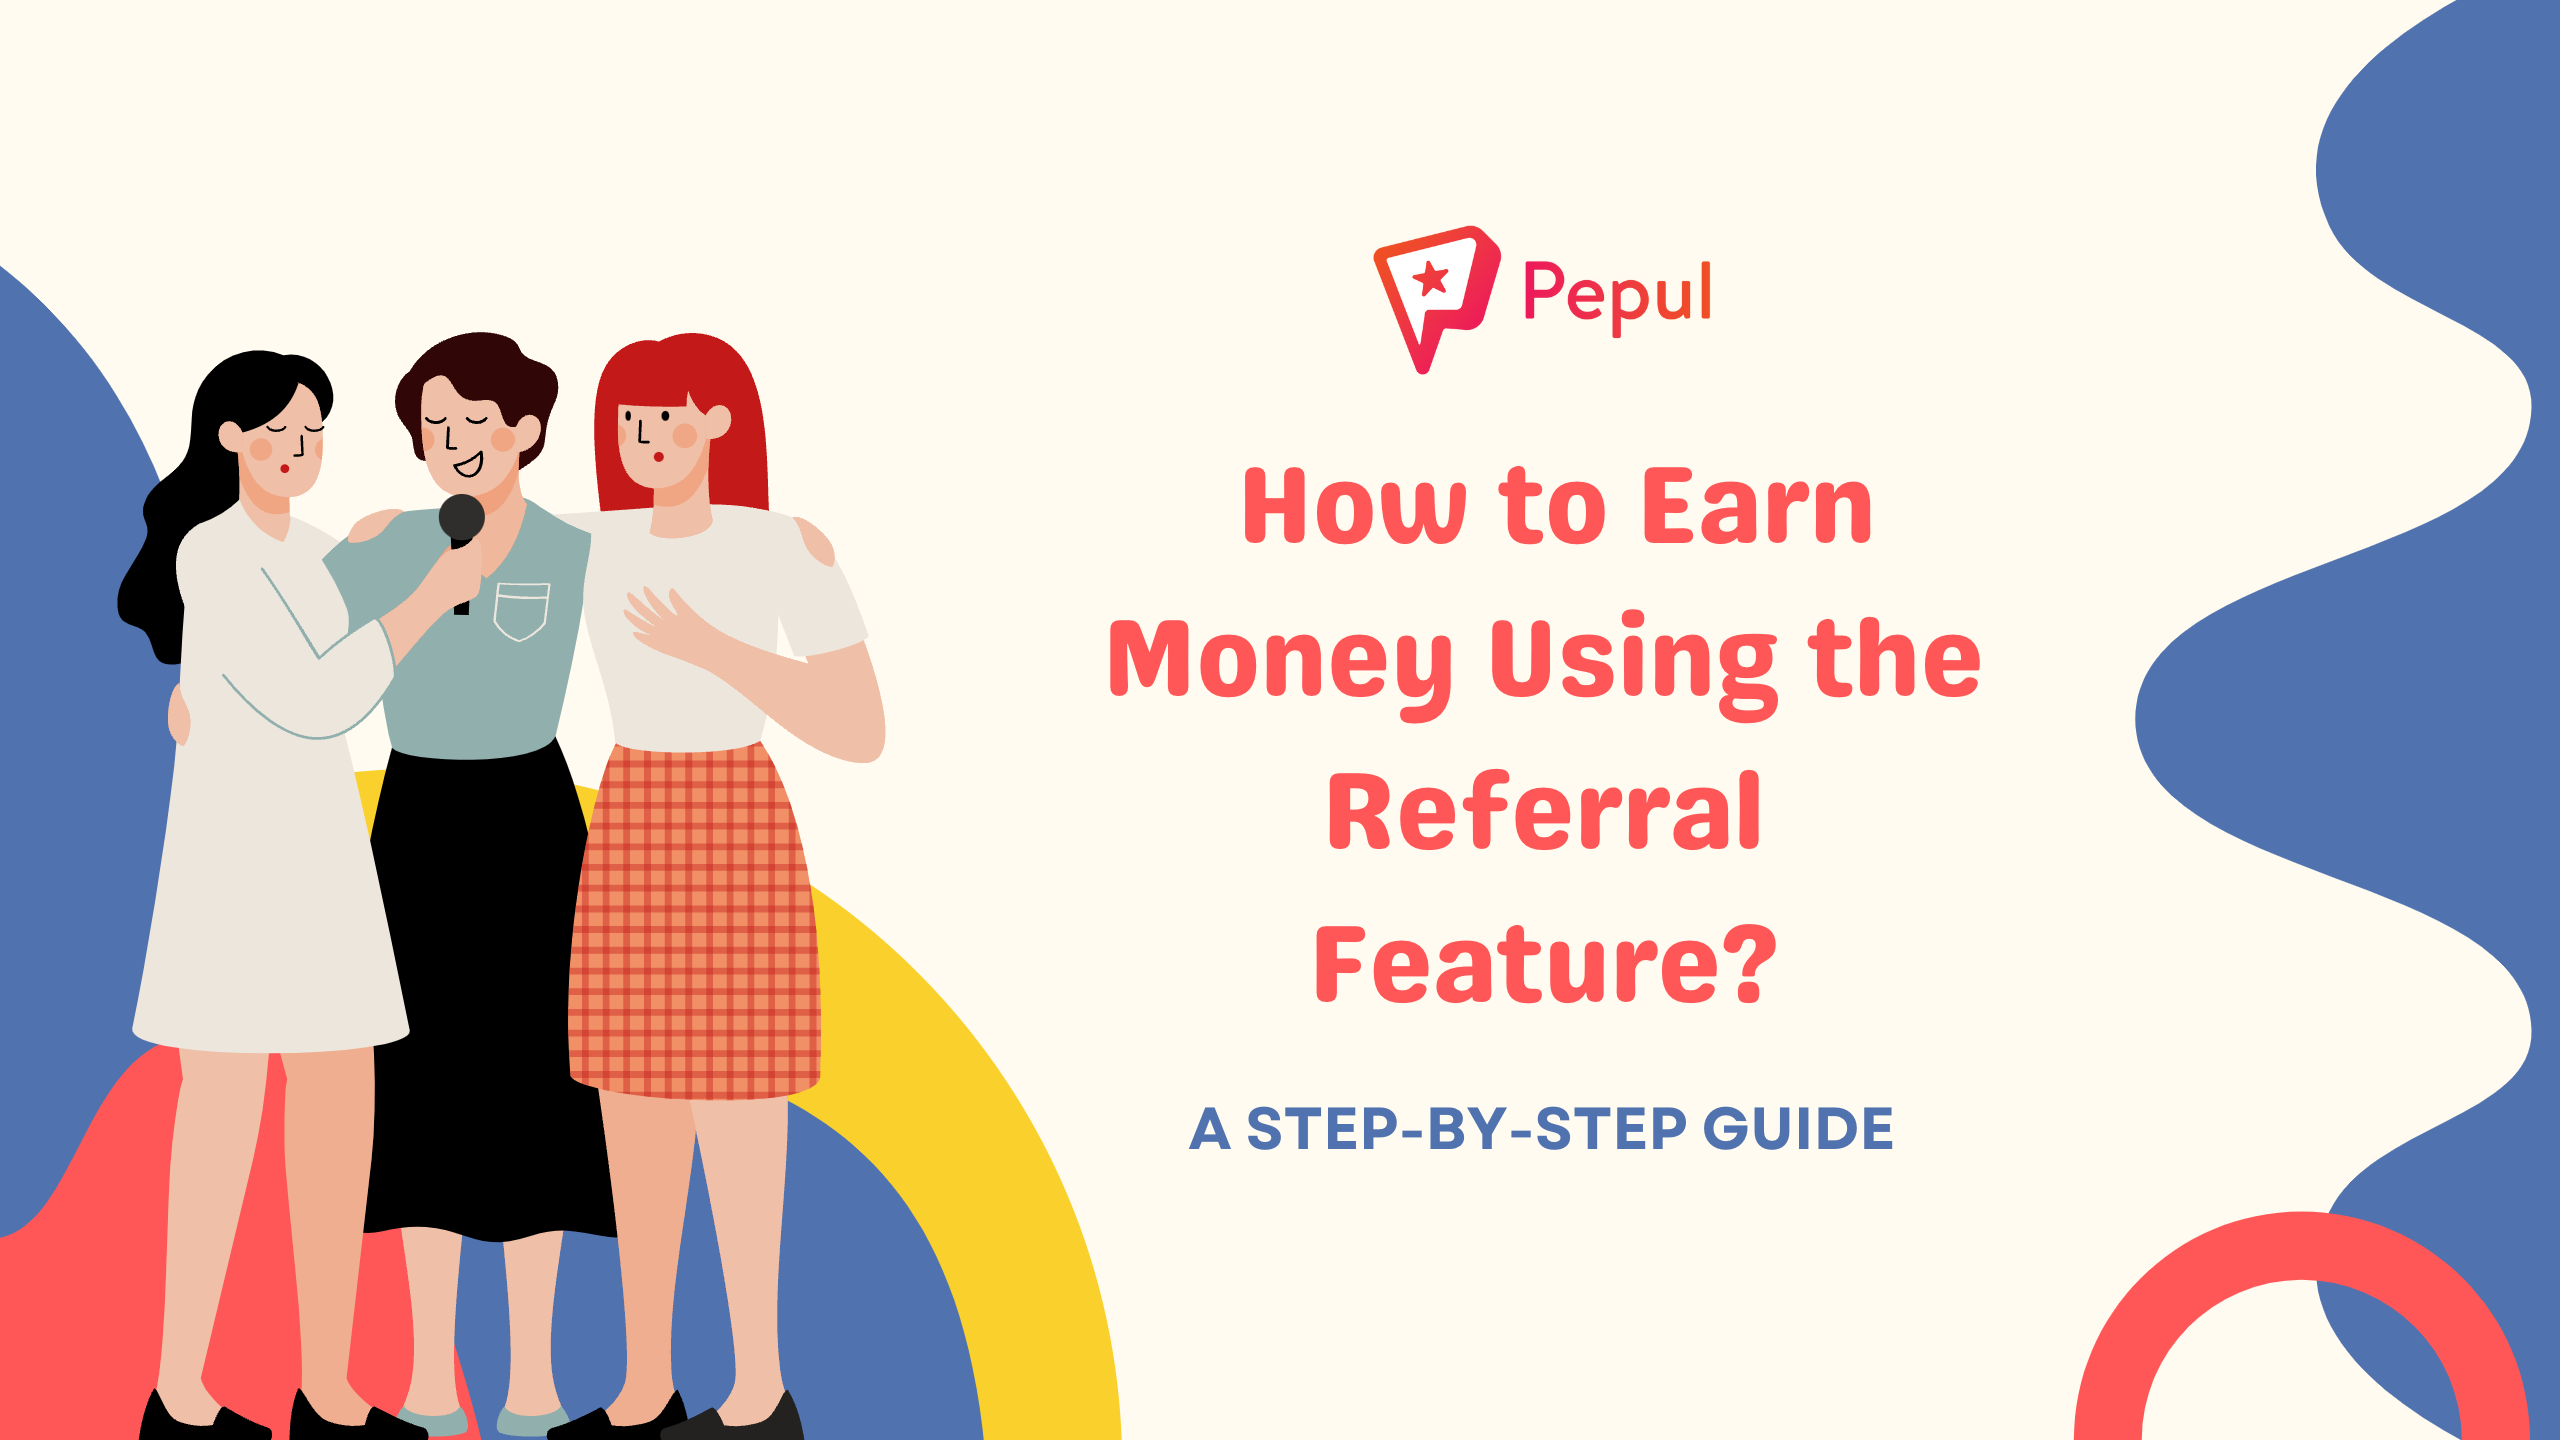 How to Earn Money Using the Referral Feature?